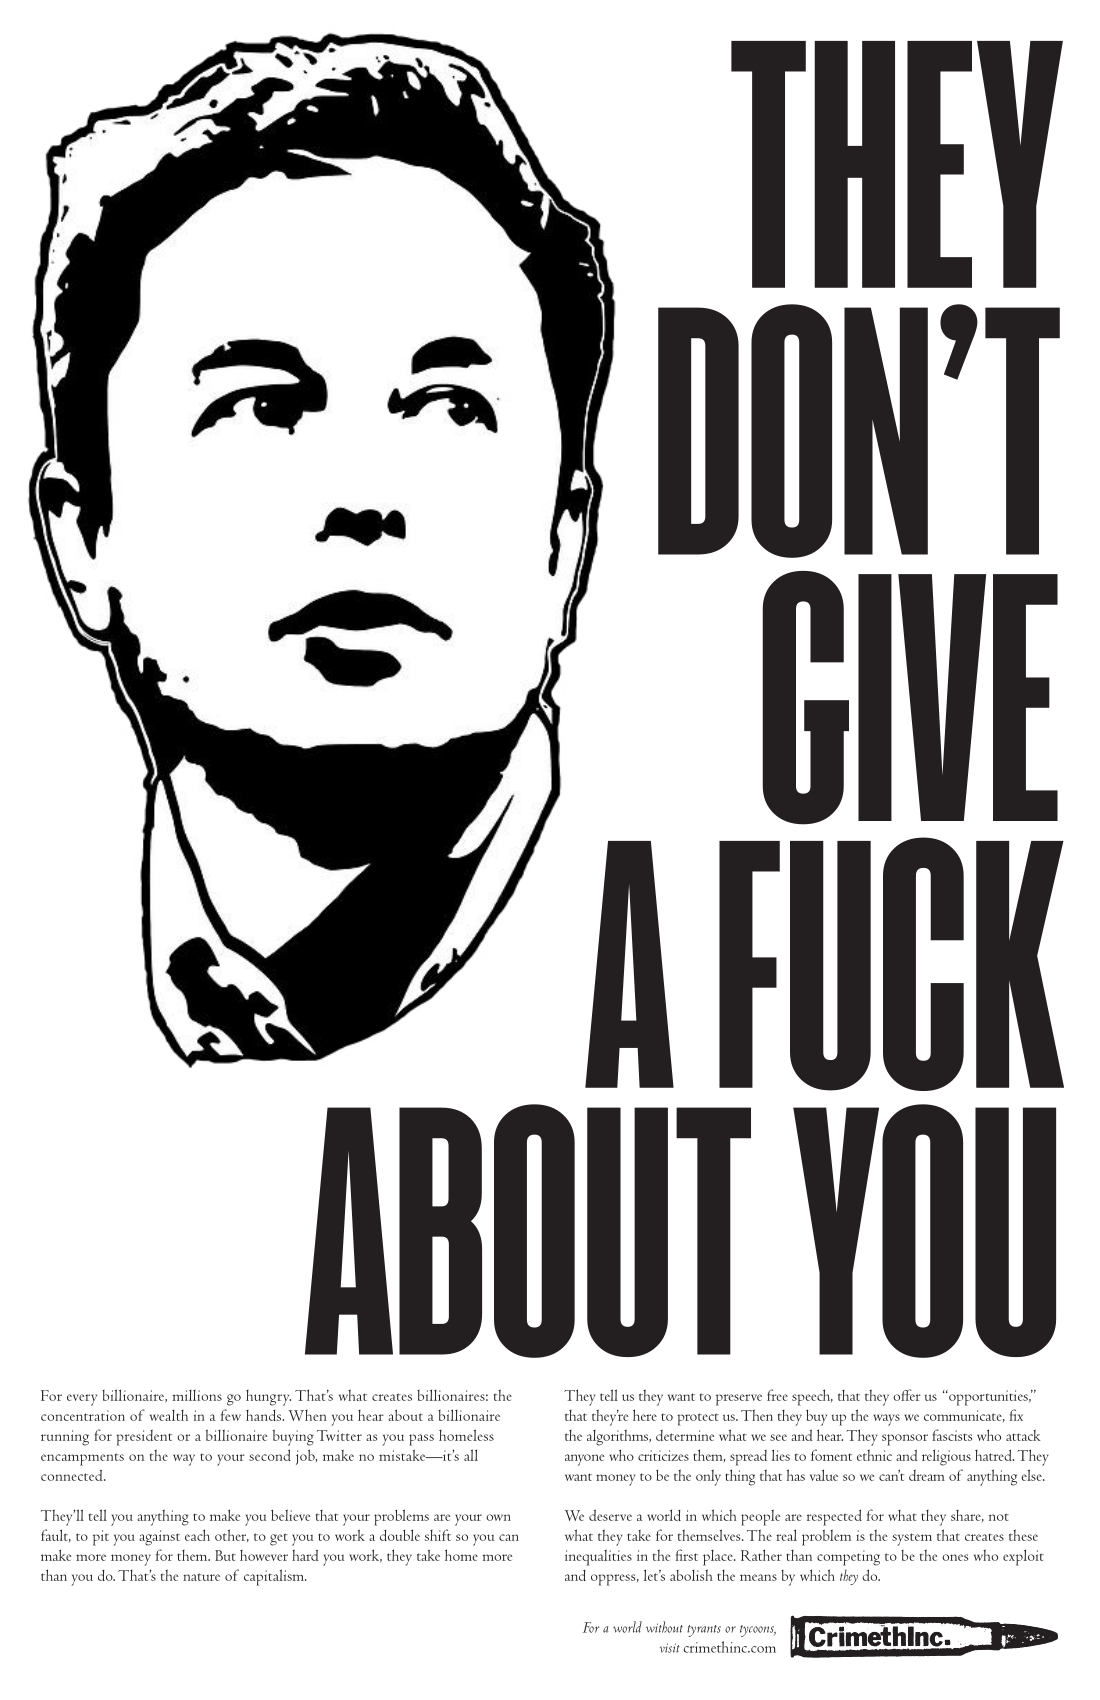 A Crimethinc poster with an image of Elon Musk and the headline "They Don't Give a Fuck About You."